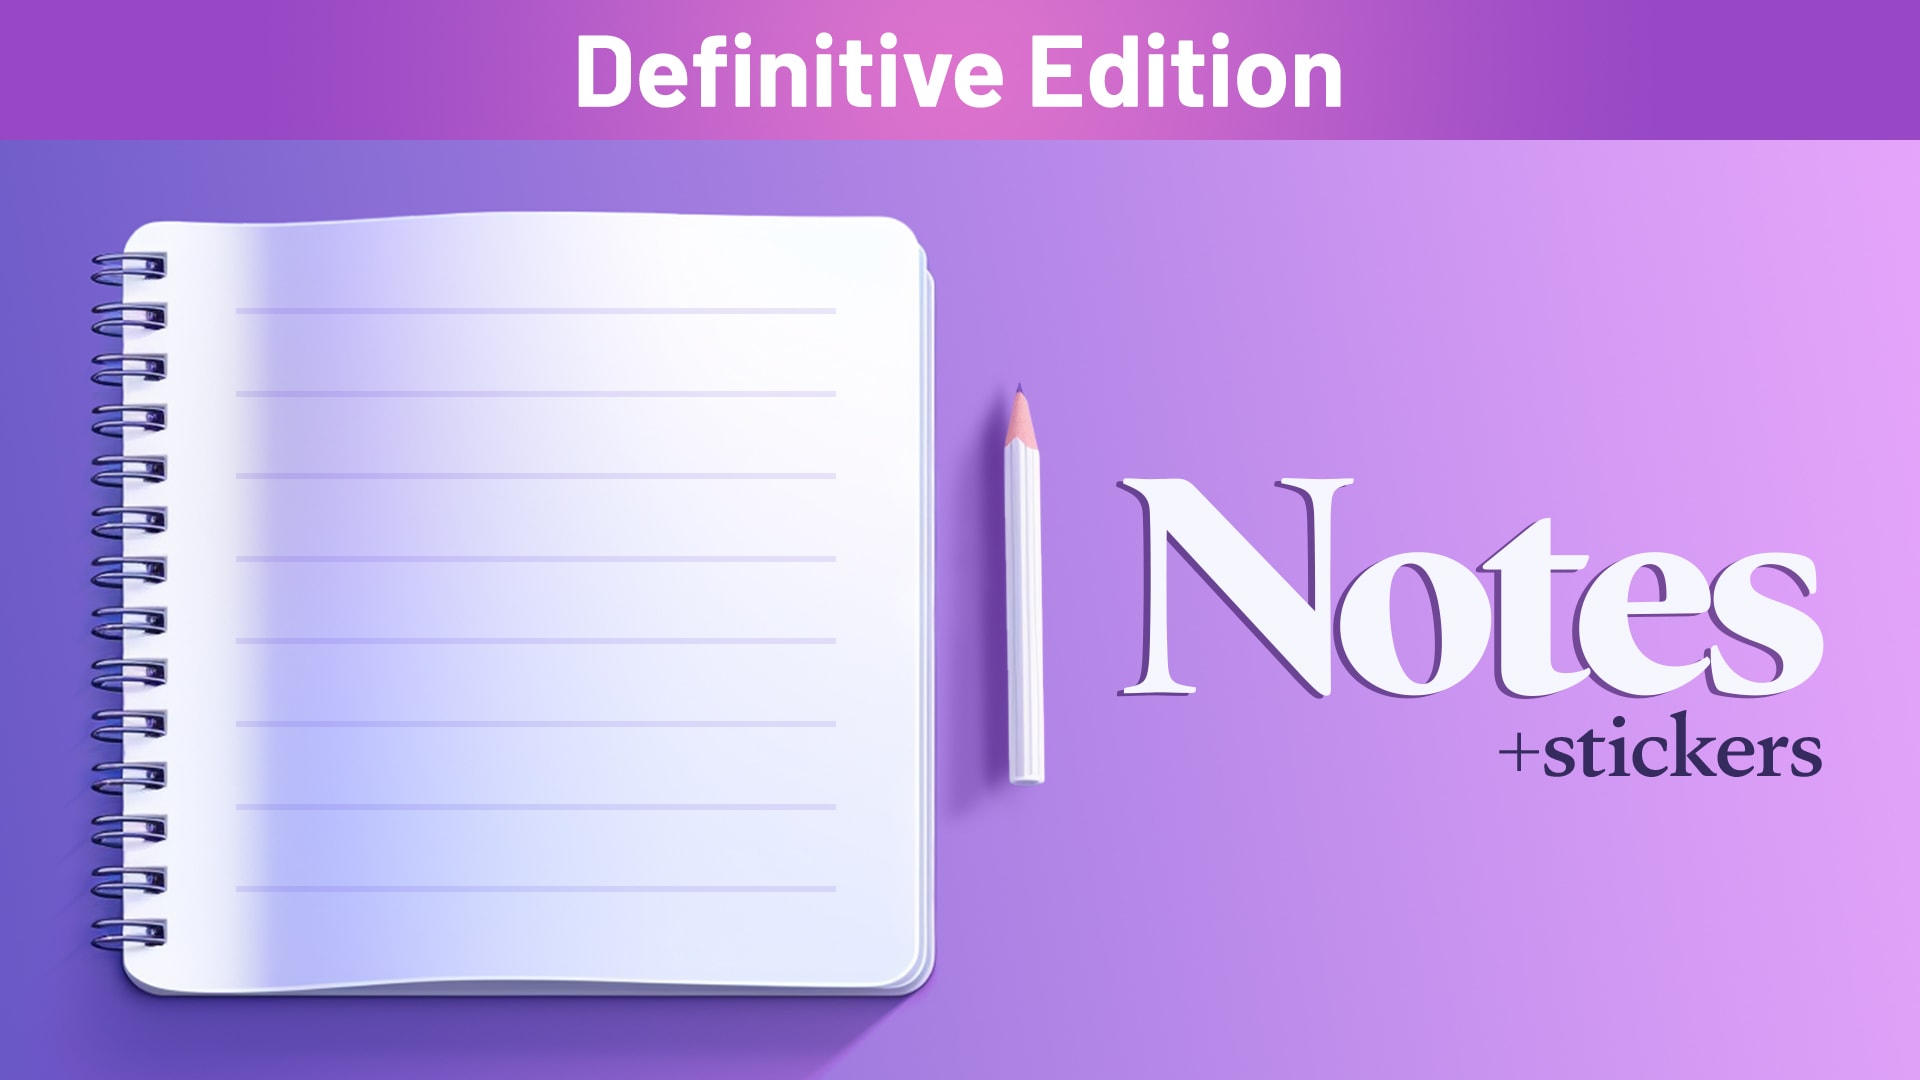 Notes + Stickers Definitive Edition